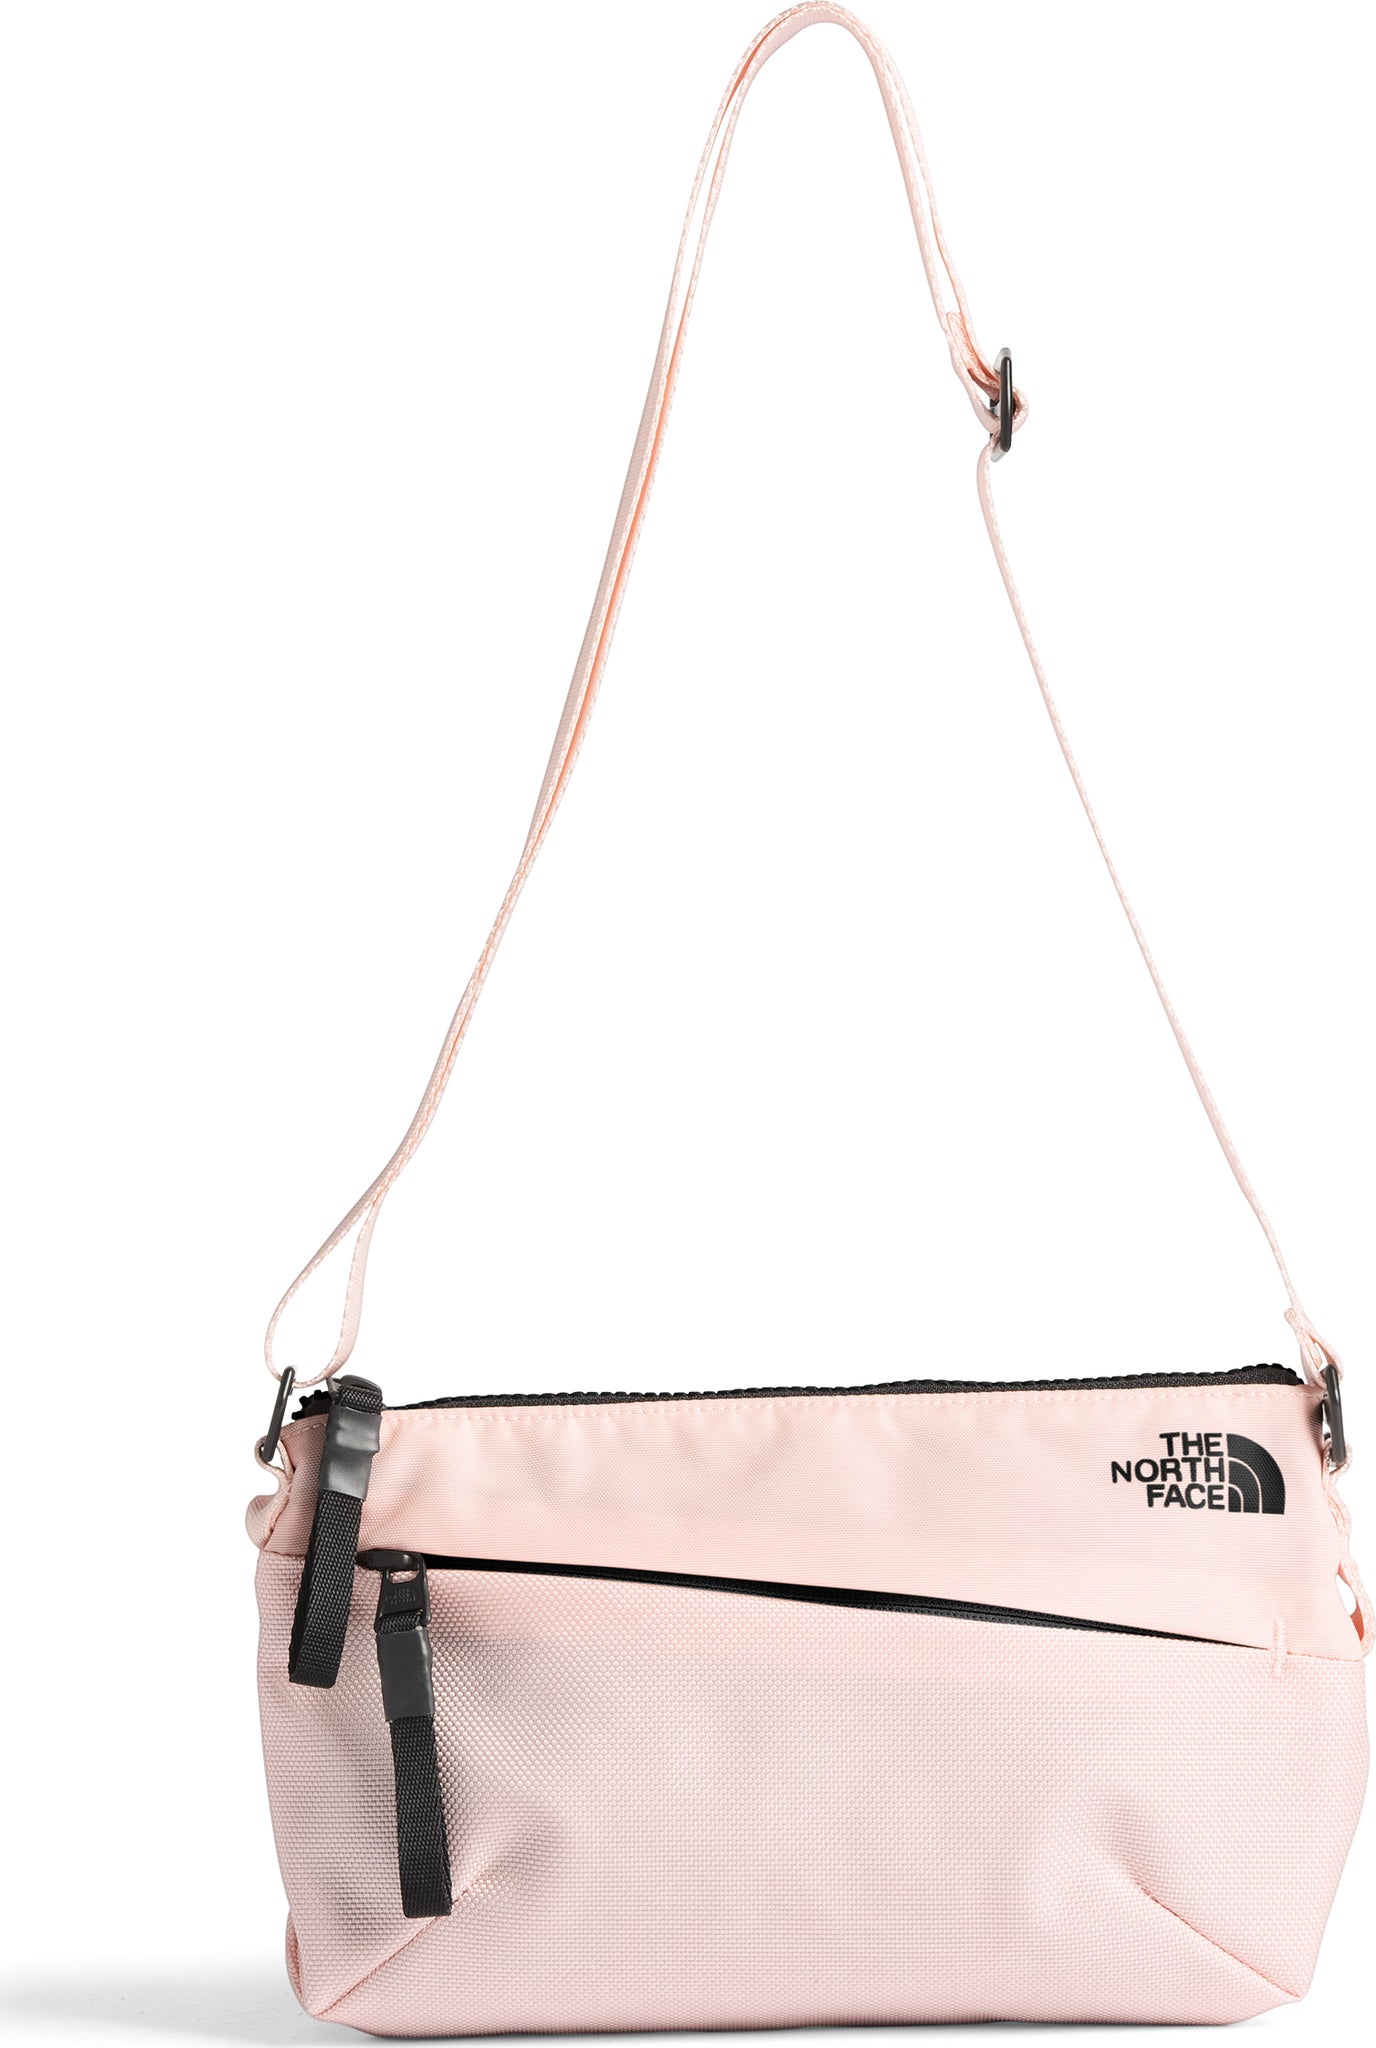 electra tote s